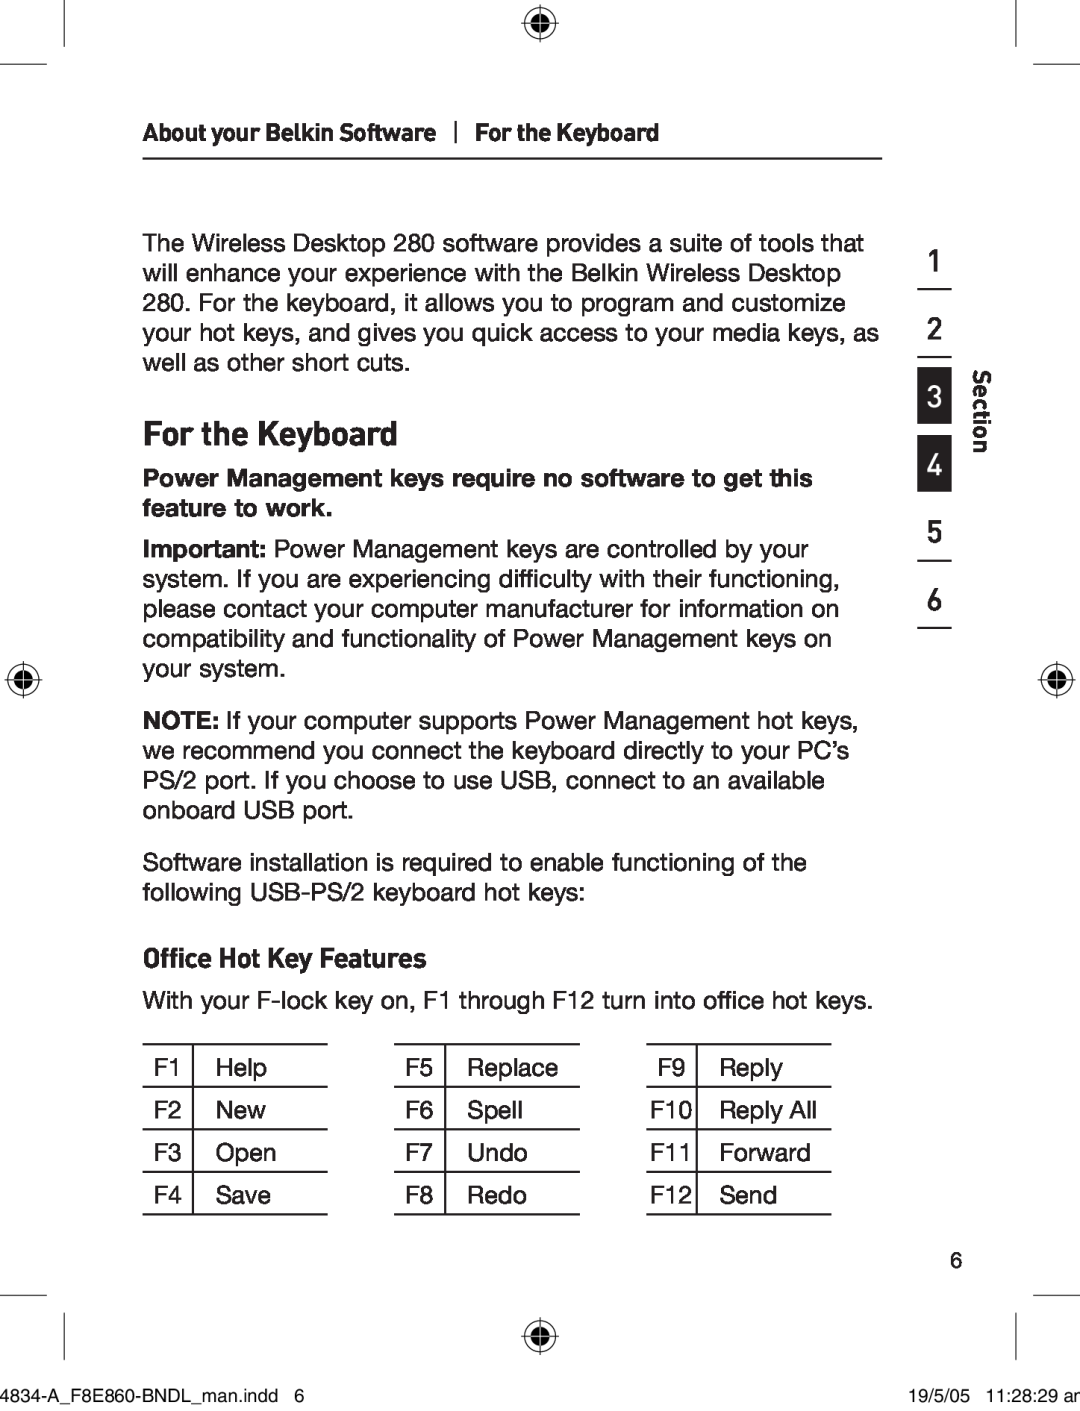 Belkin 280 manual Office Hot Key Features, About your Belkin Software For the Keyboard, Section 